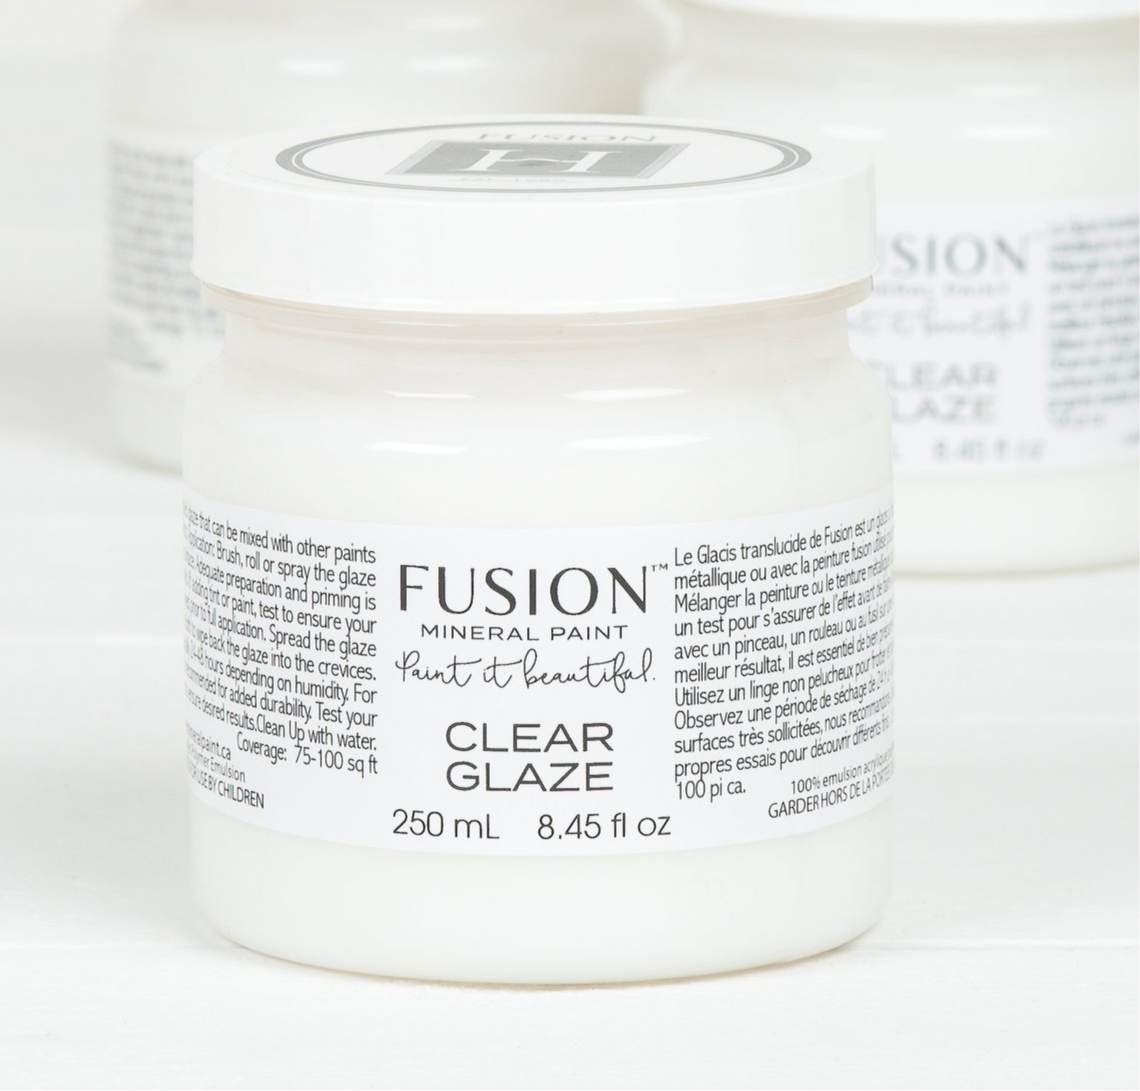 Clear Glaze by Fusion